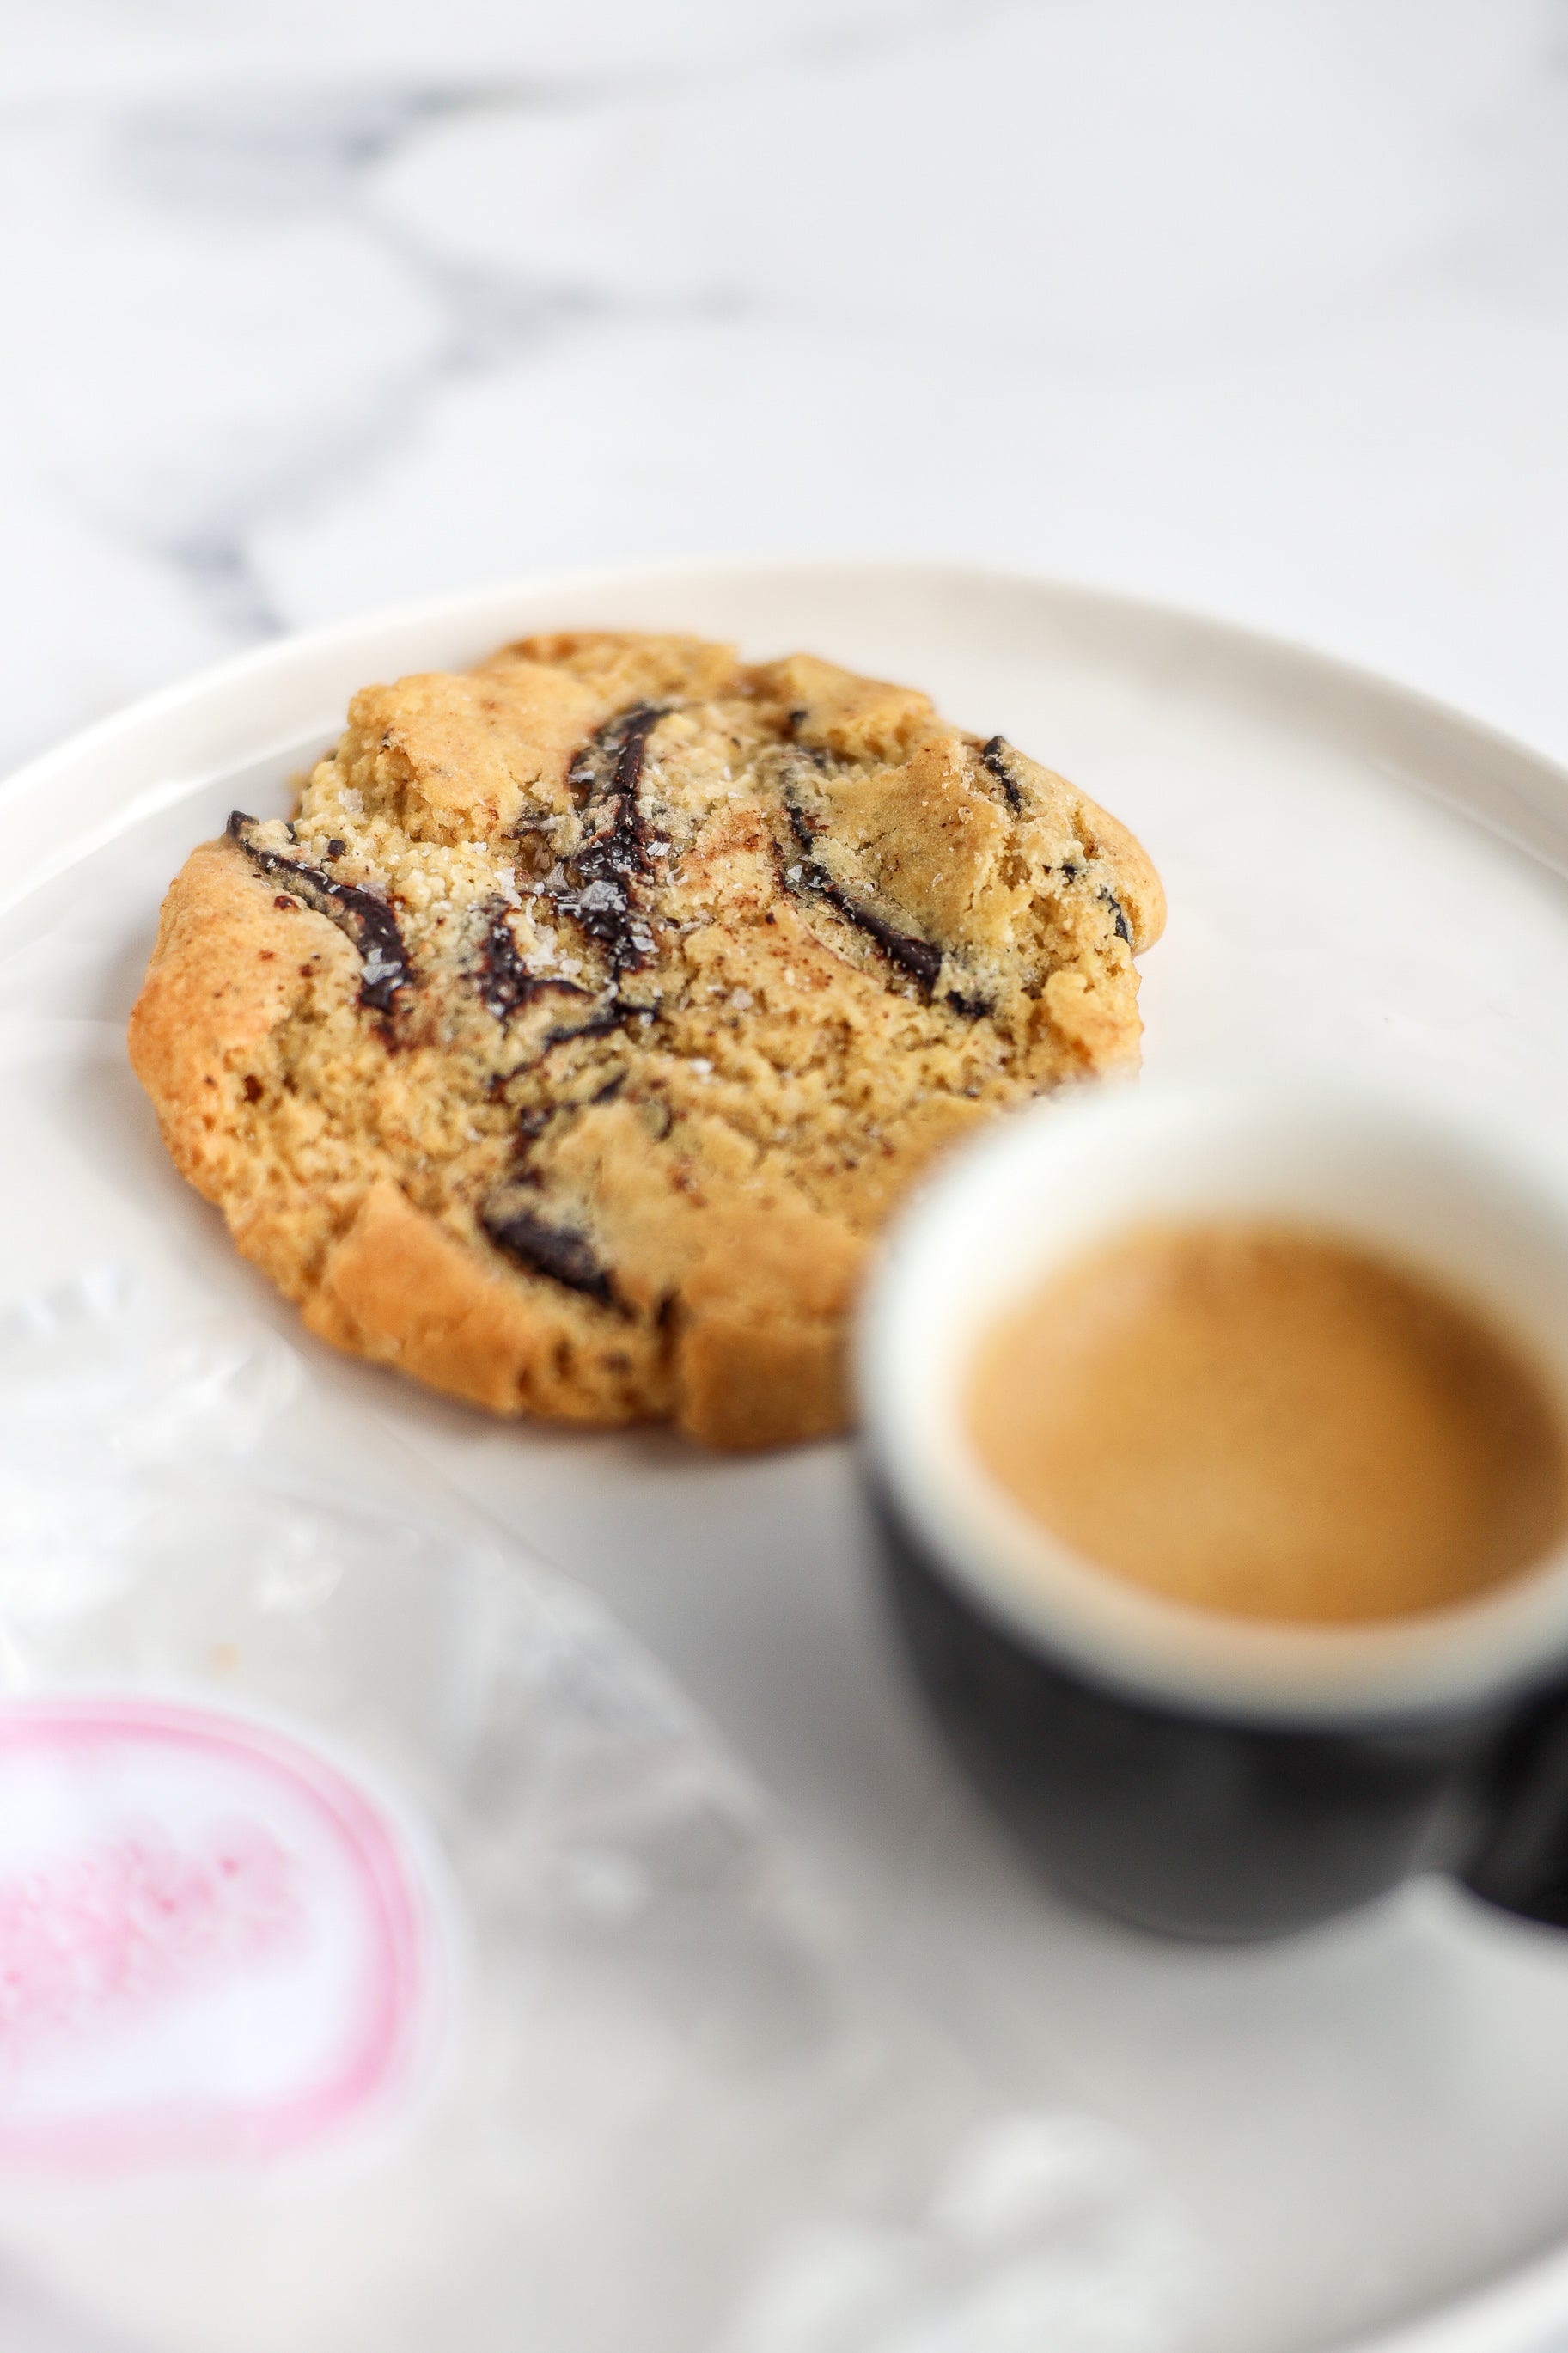 Salted dark chocolate cookies served with an espresso